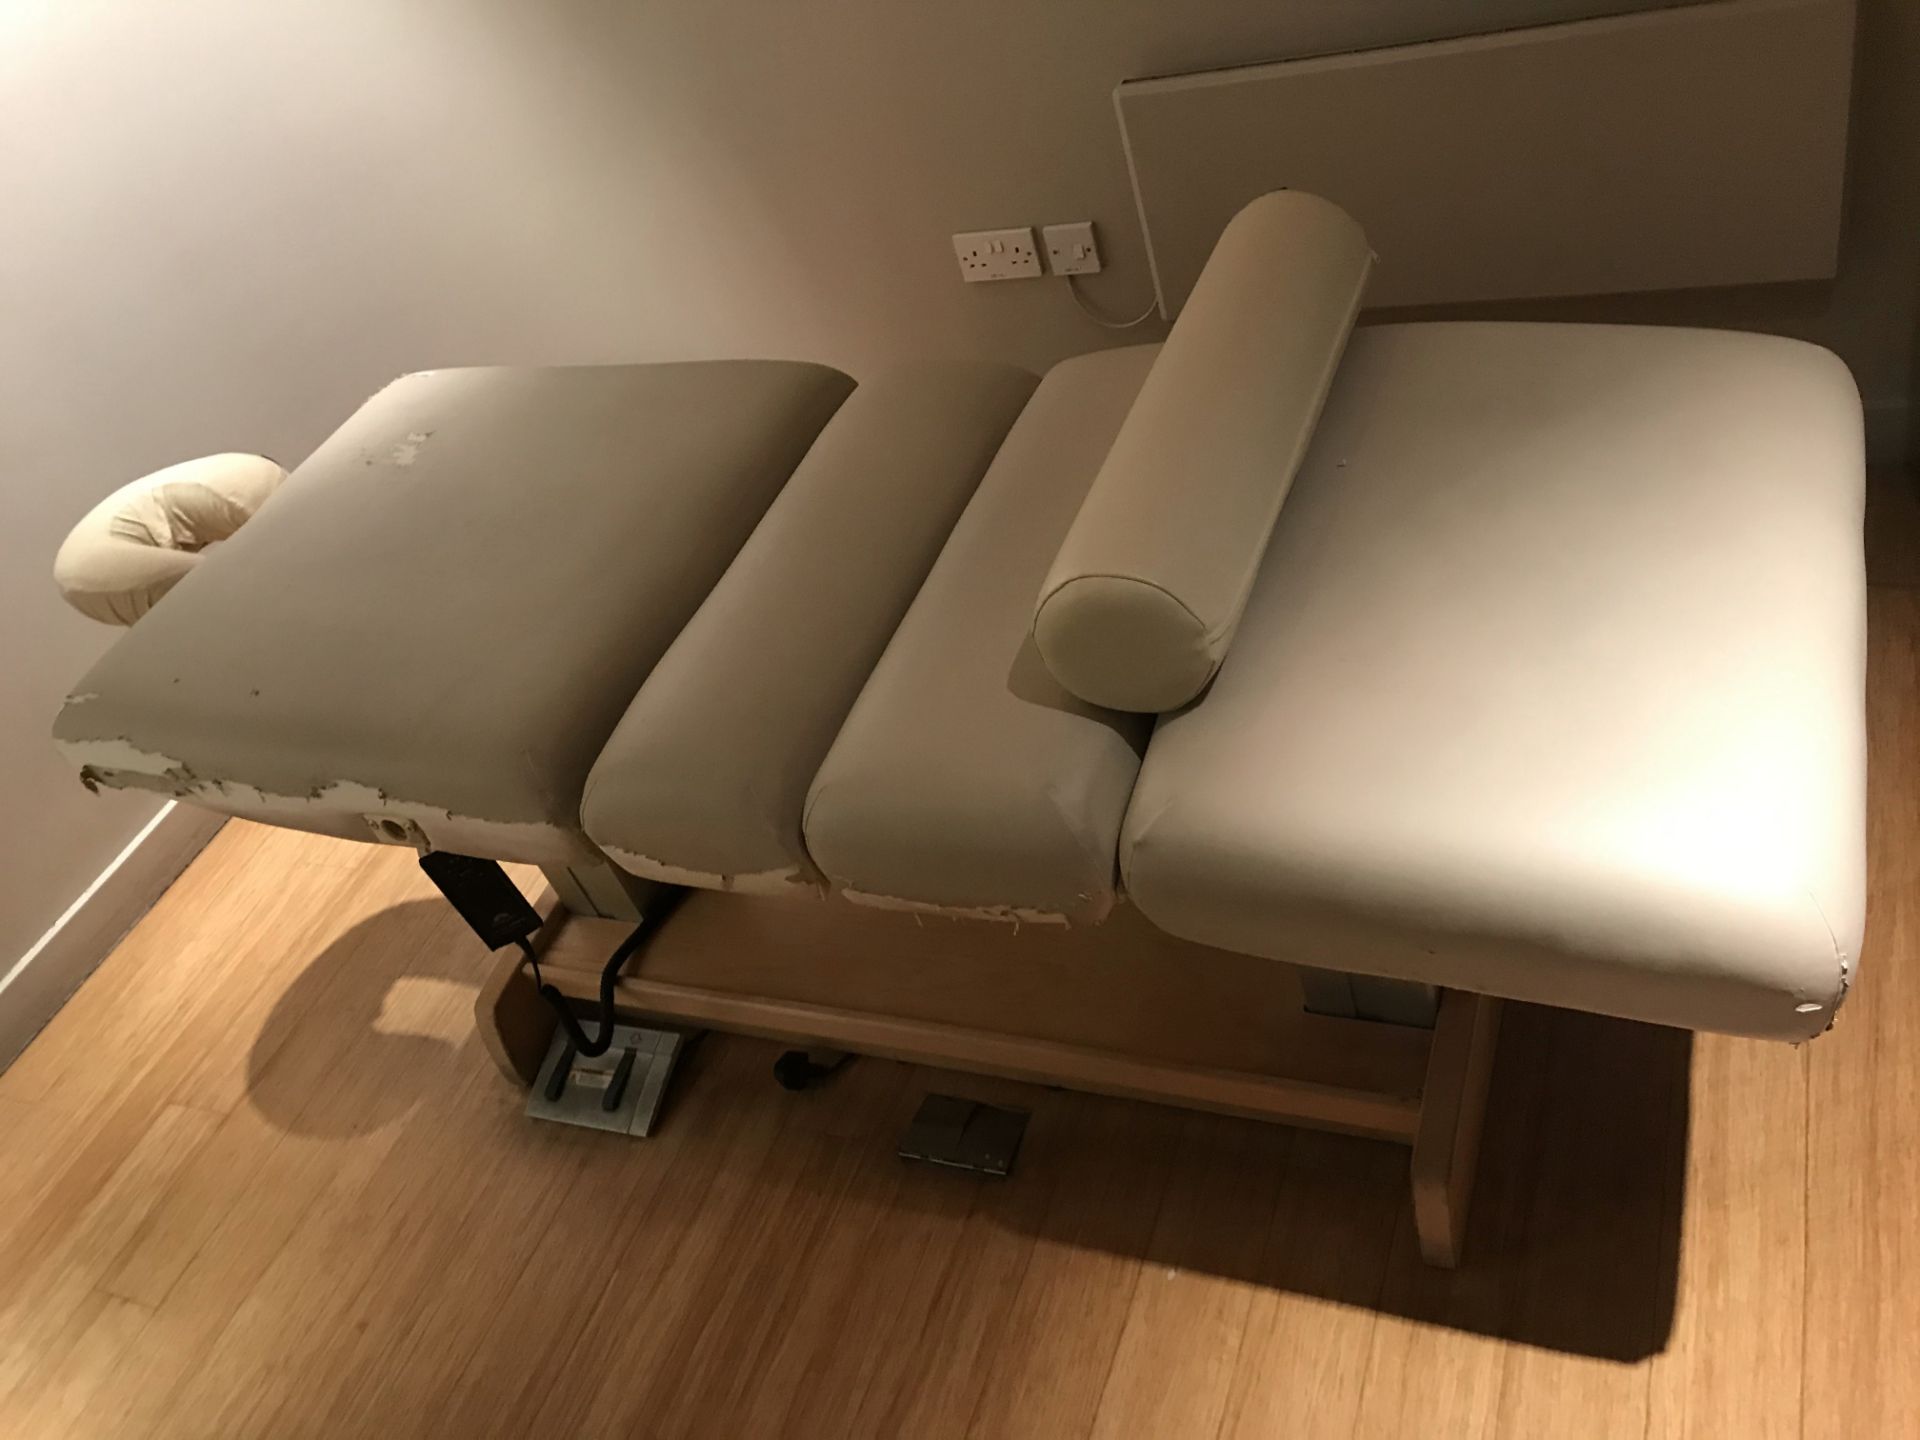 1 x Oakworks Clinician Electric-Hydraulic Massage Table With Footpedal and Linak HBWO Remote Control - Image 11 of 11